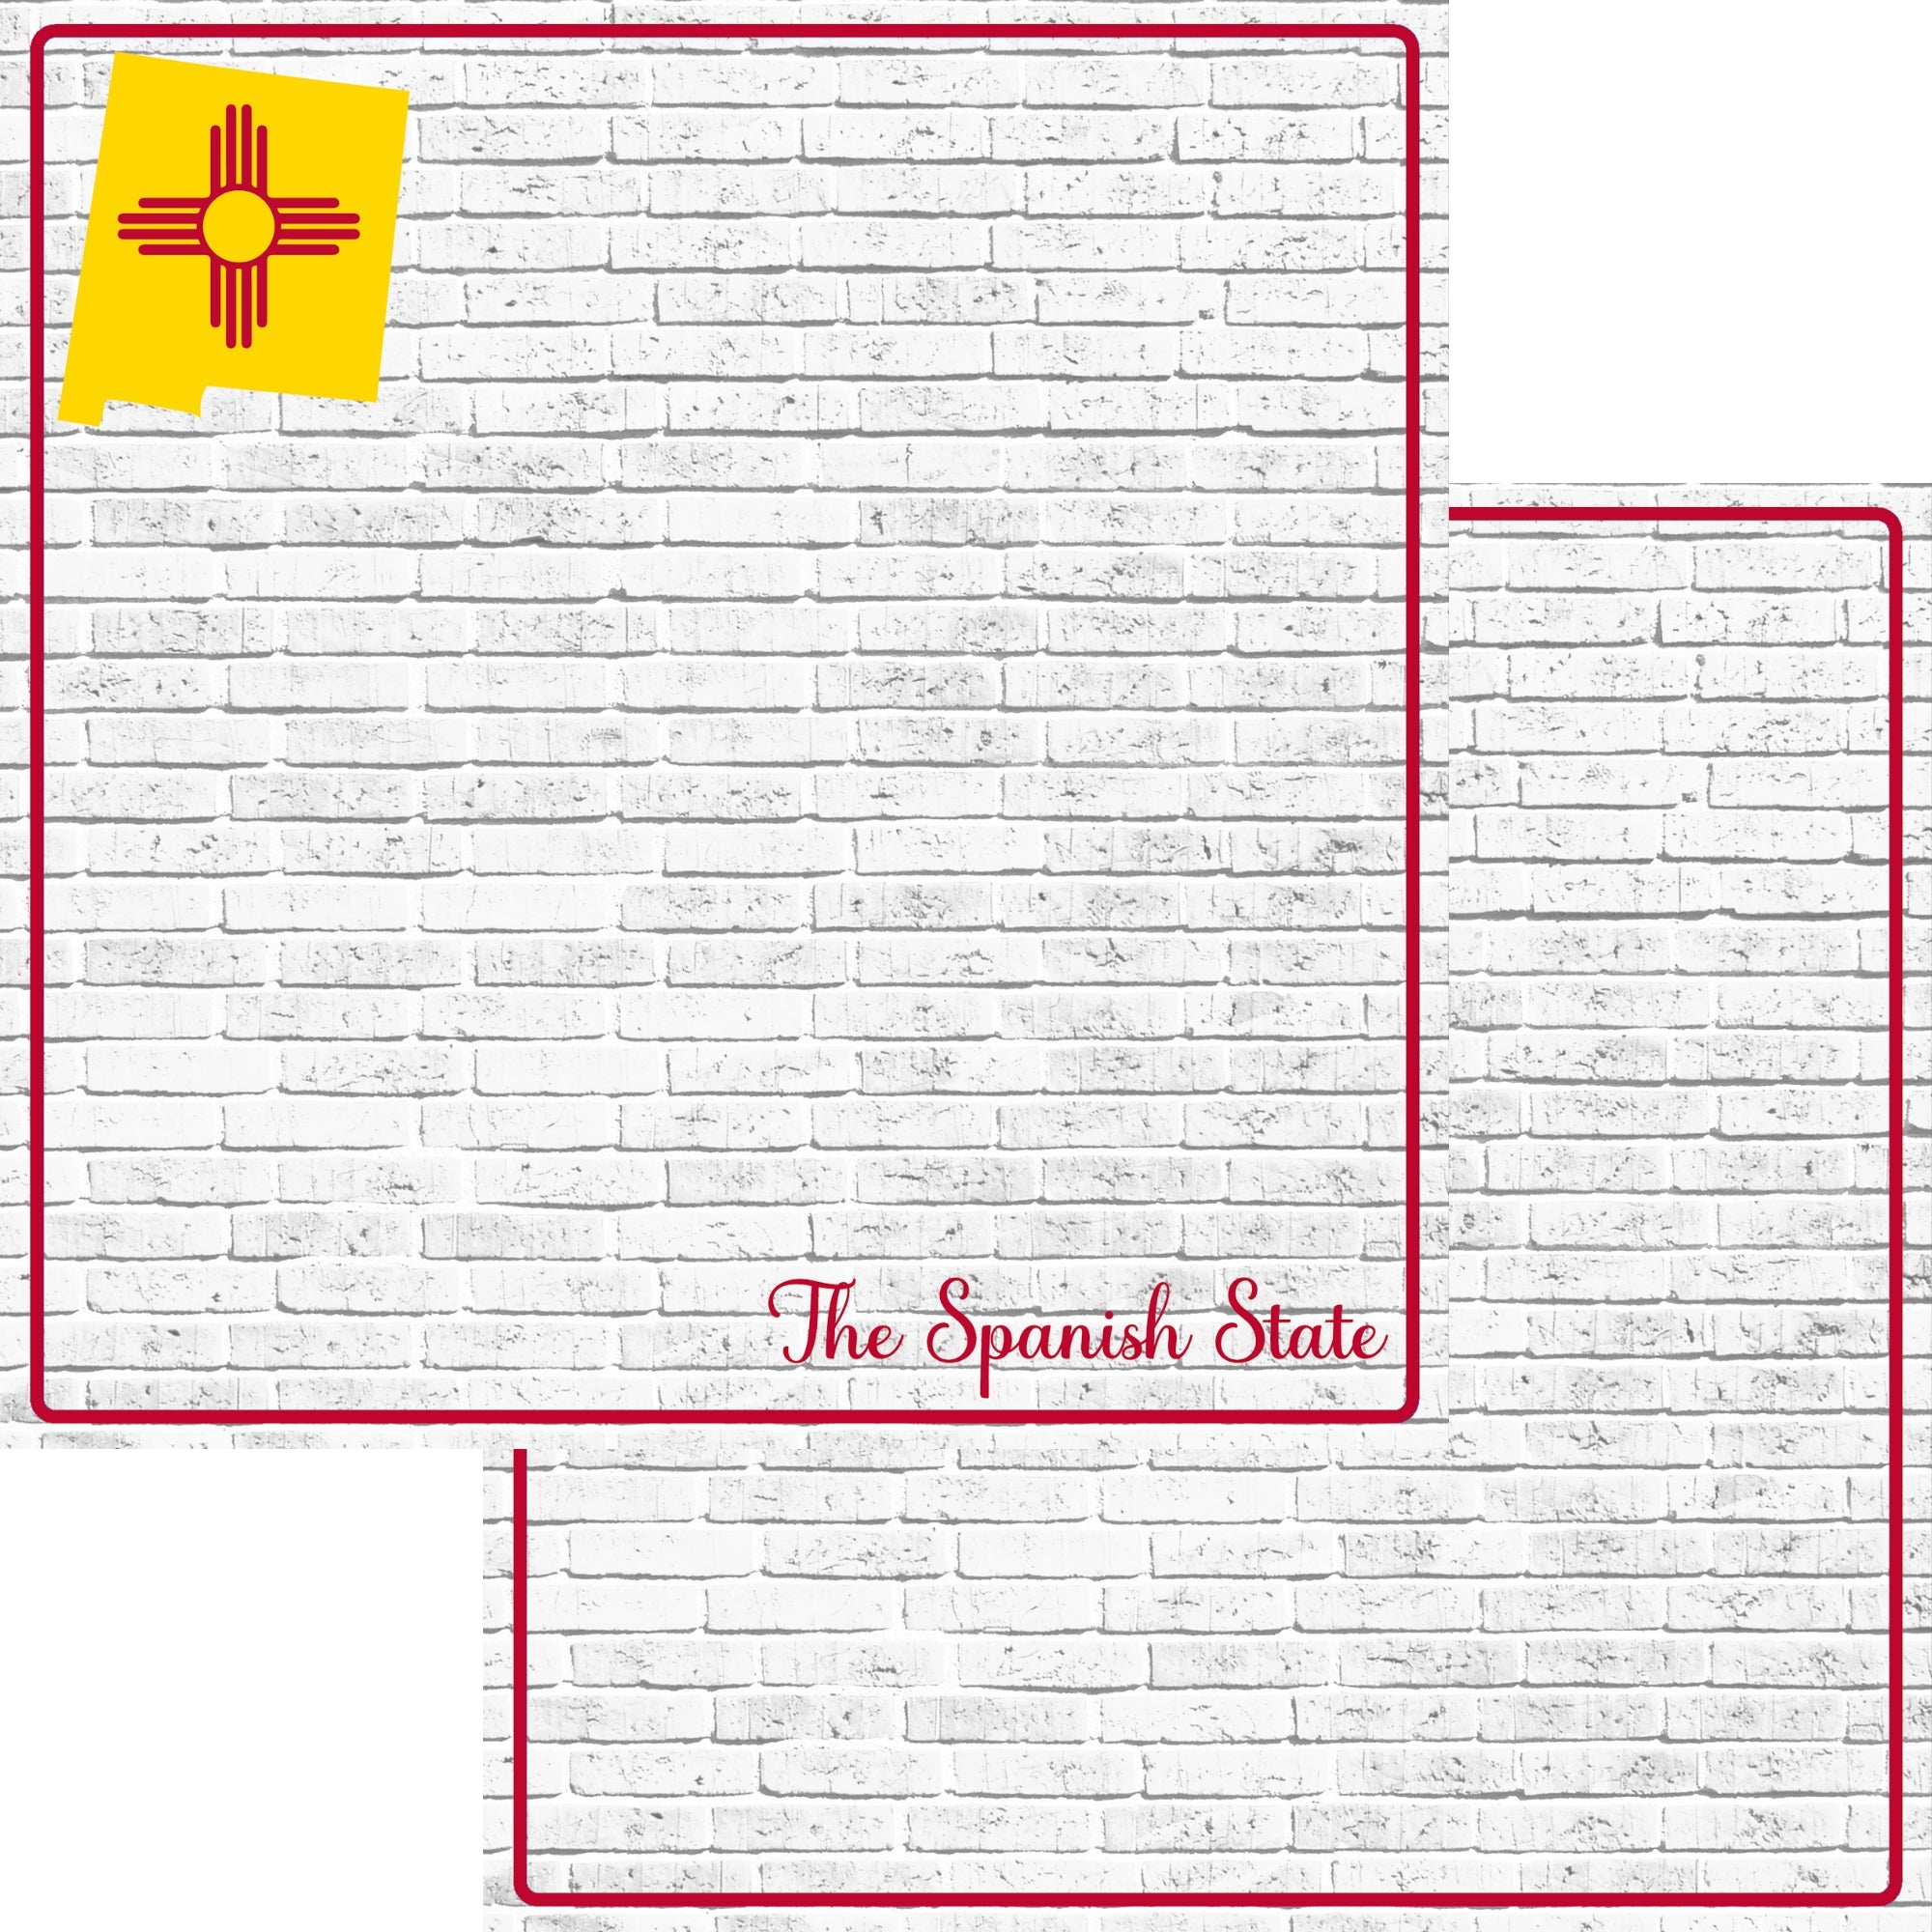 Fifty States Collection New Mexico 12 x 12 Double-Sided Scrapbook Paper by SSC Designs